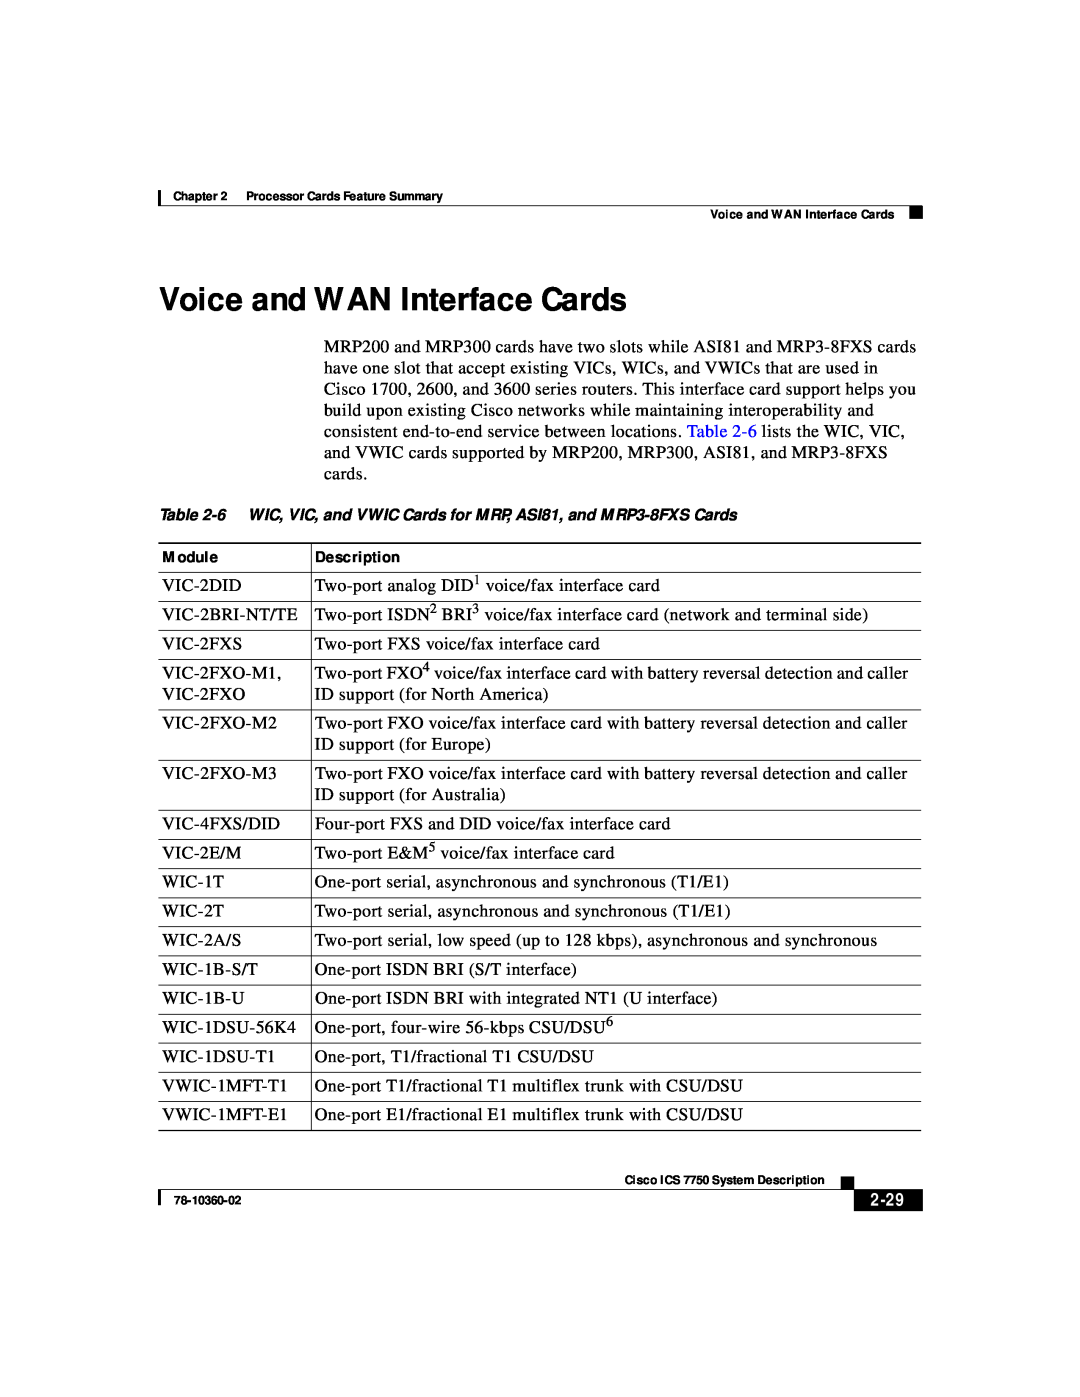 Cisco Systems ICS-7750 manual Voice and WAN Interface Cards, 2-29 